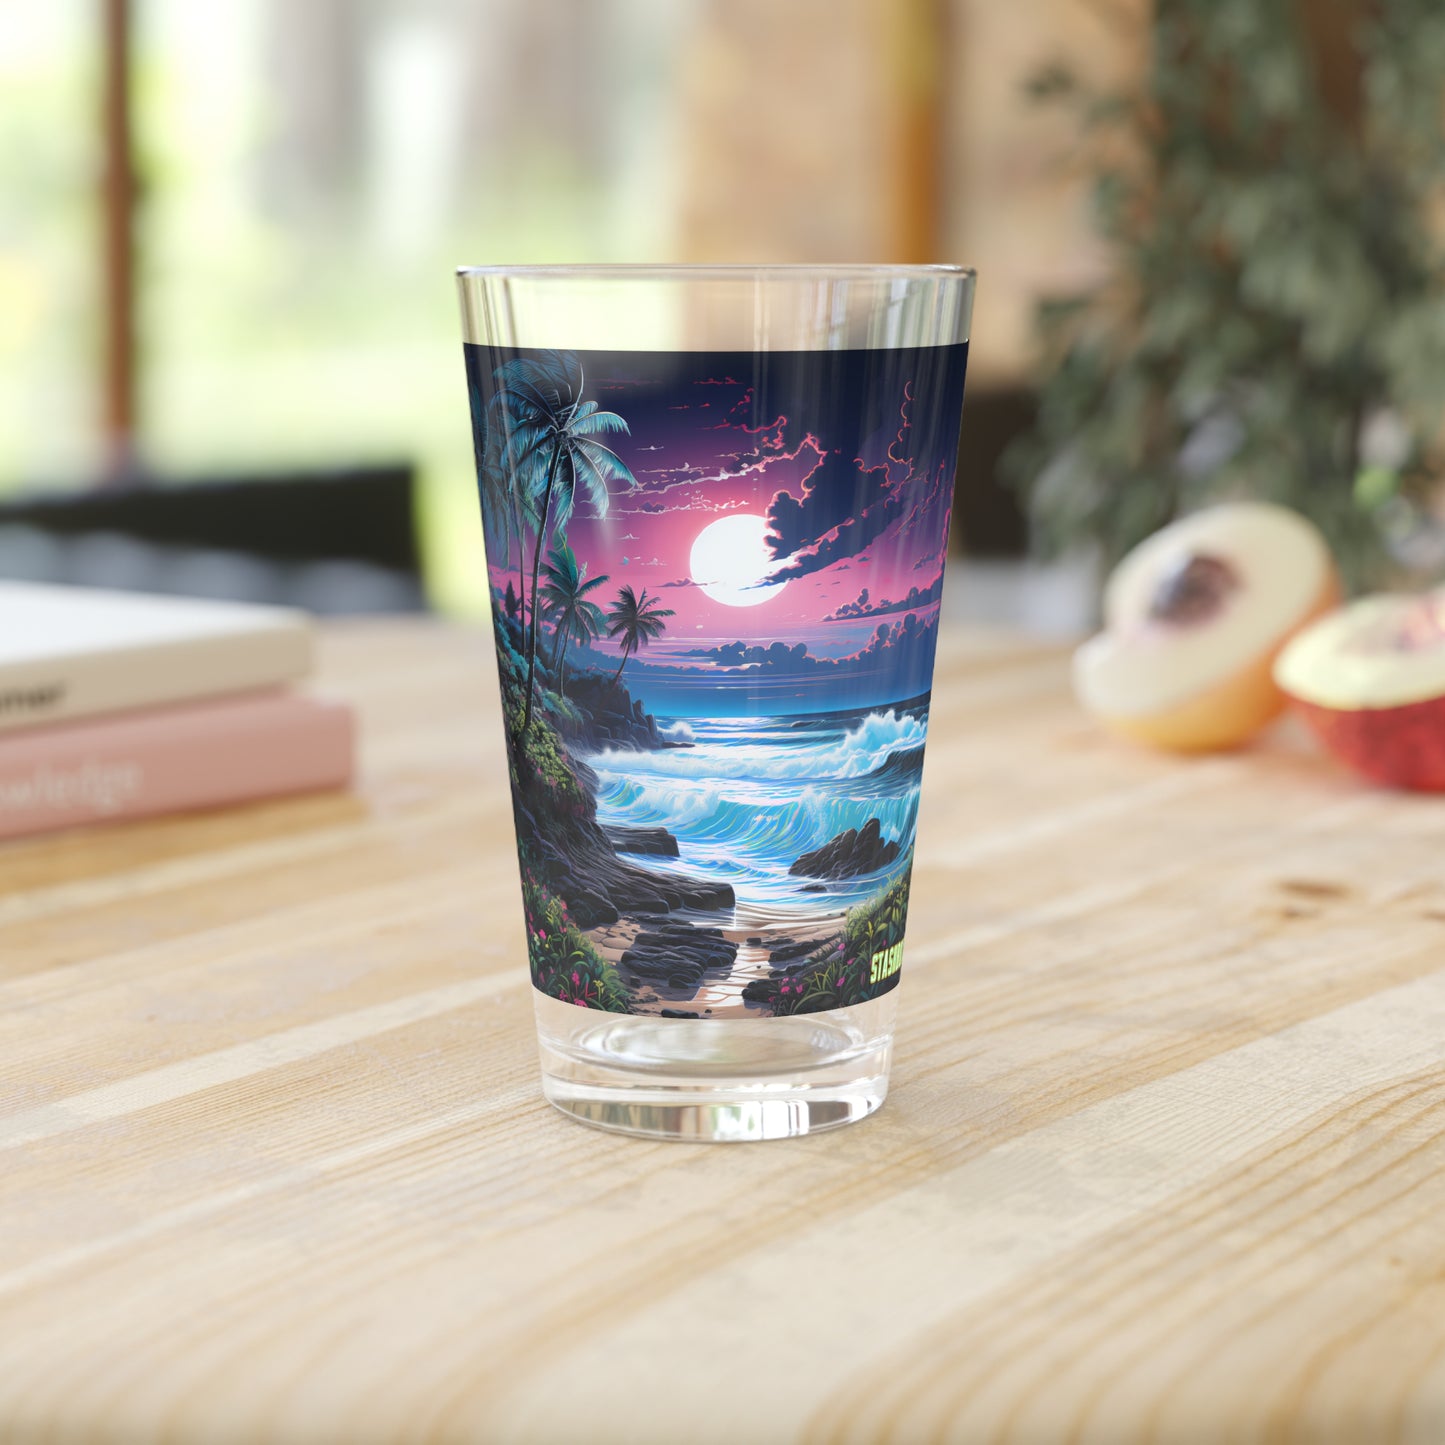 Transport yourself to a Tropical Paradise Beach Night Sky with our Pint Glass - Waves Design #018. Crafted by Stashbox.ai, this 16oz glass mirrors the serene beauty of a beach night. Sip your drinks in bliss, letting the waves and stars paint a picture of tranquility.